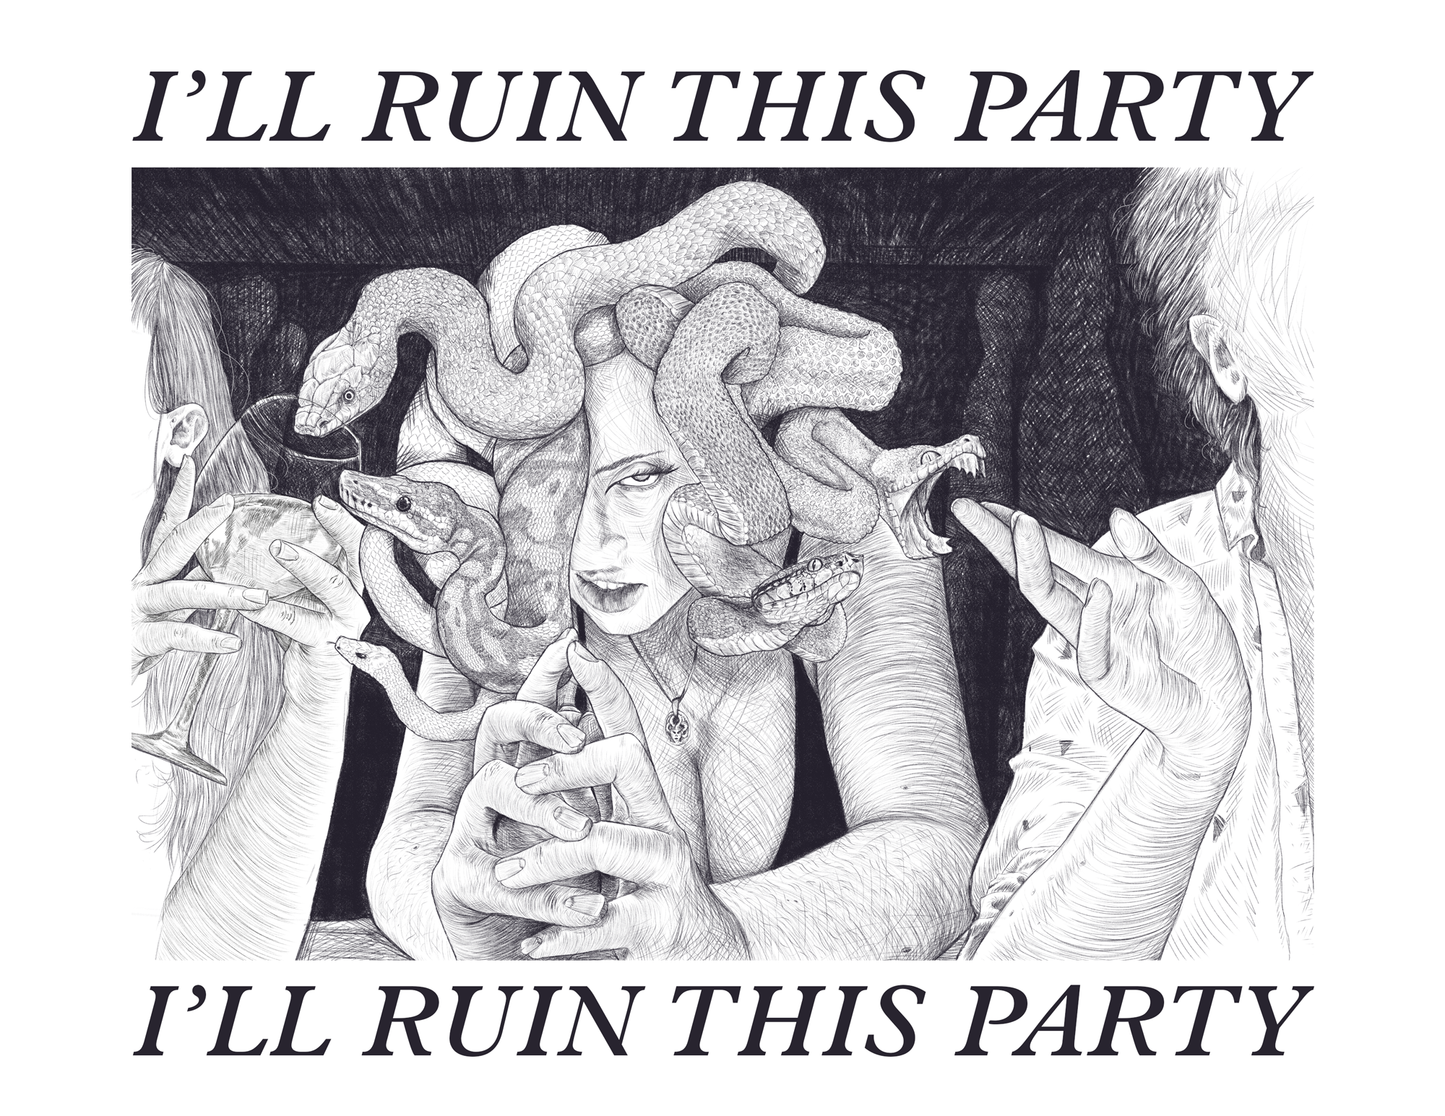 I'll ruin this party print